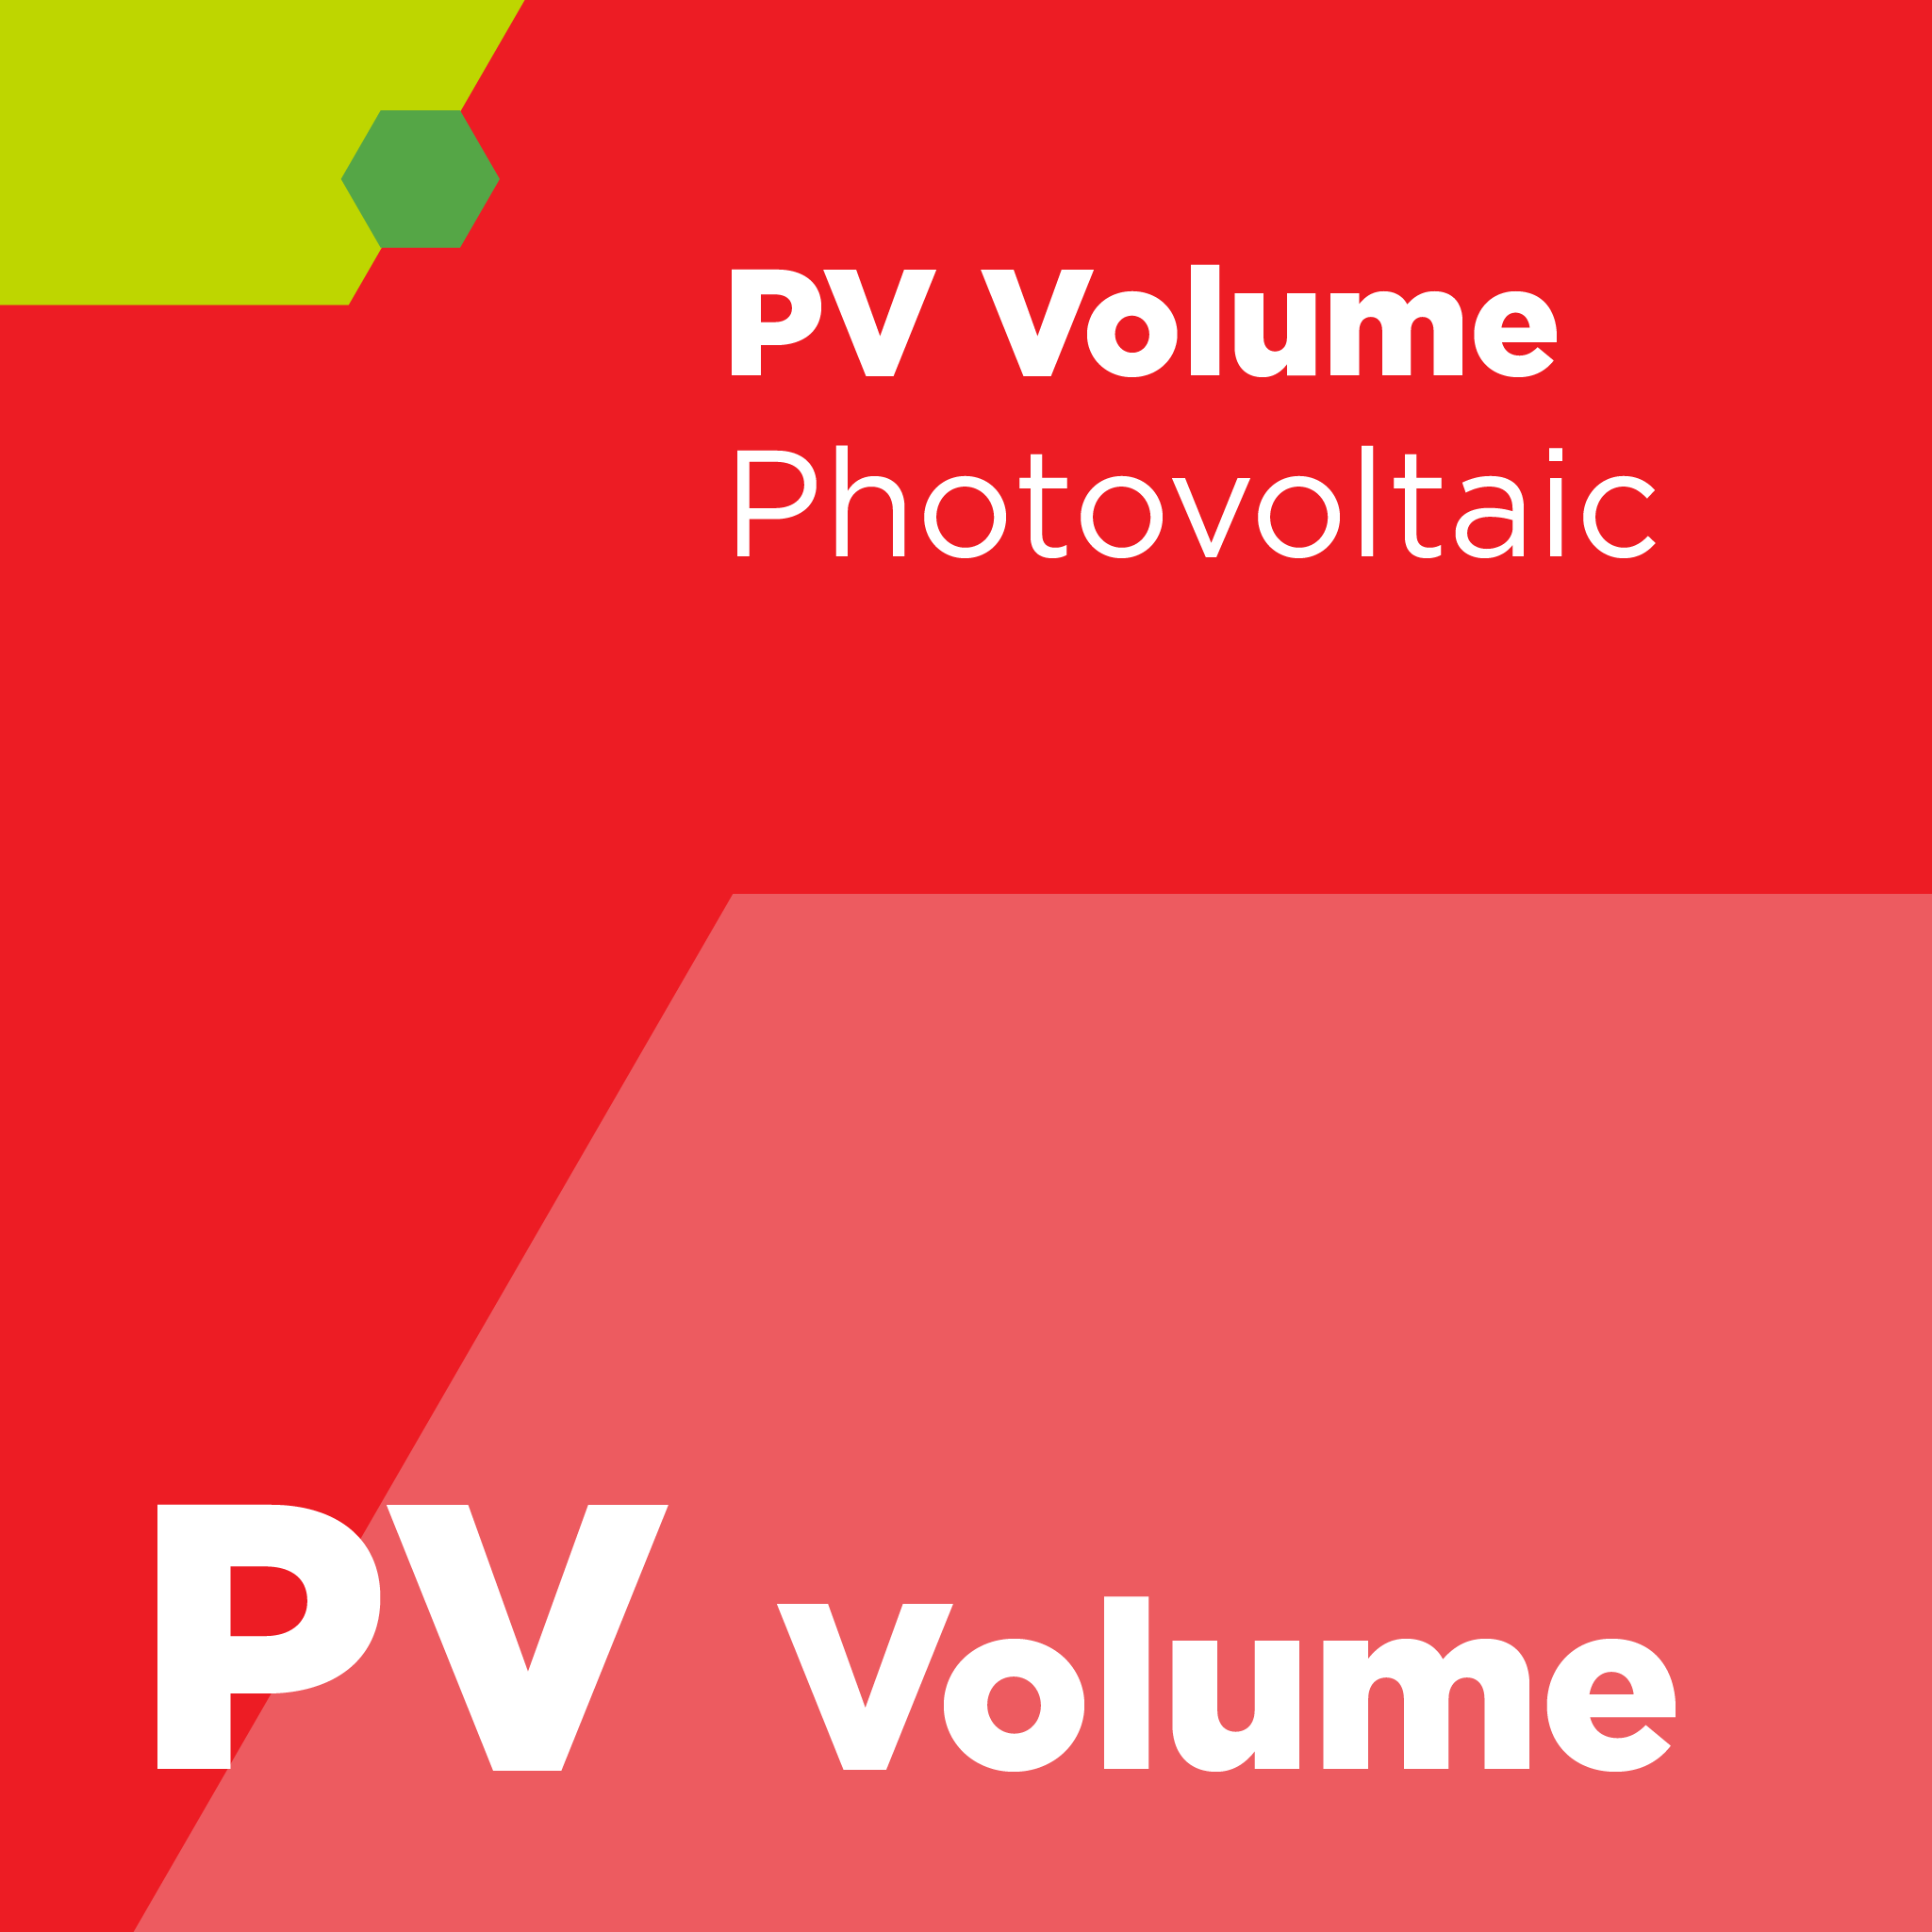 PV09700 - SEMI PV97 - Specification for Silicon Powder Used in Polysilicon Production